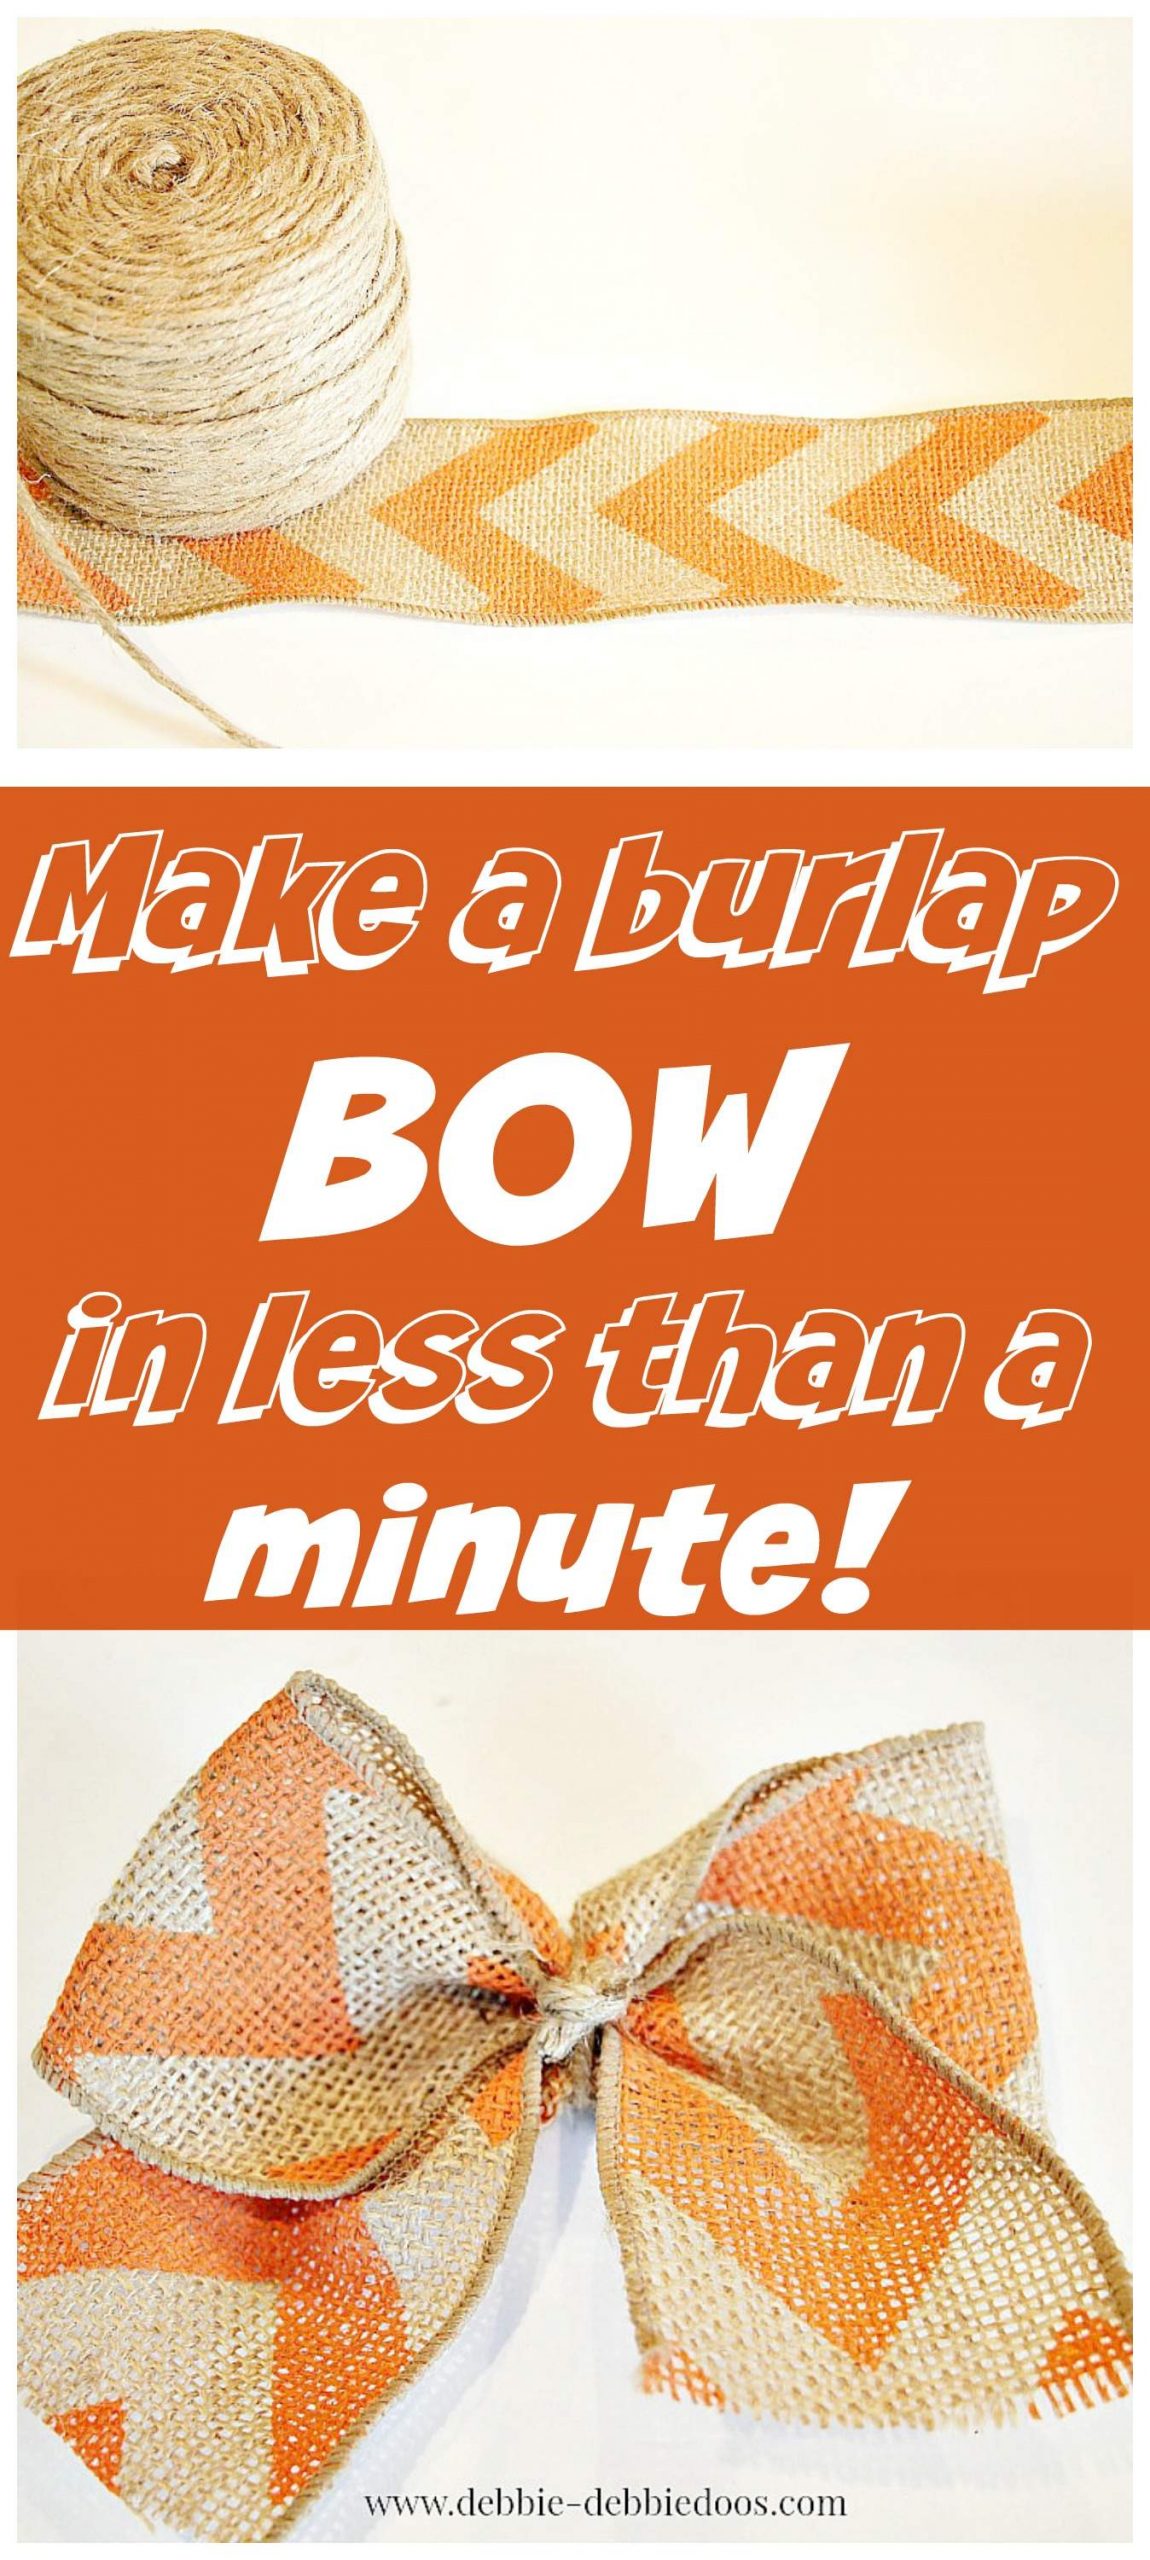 How to make a burlap bow in less than one minute flat